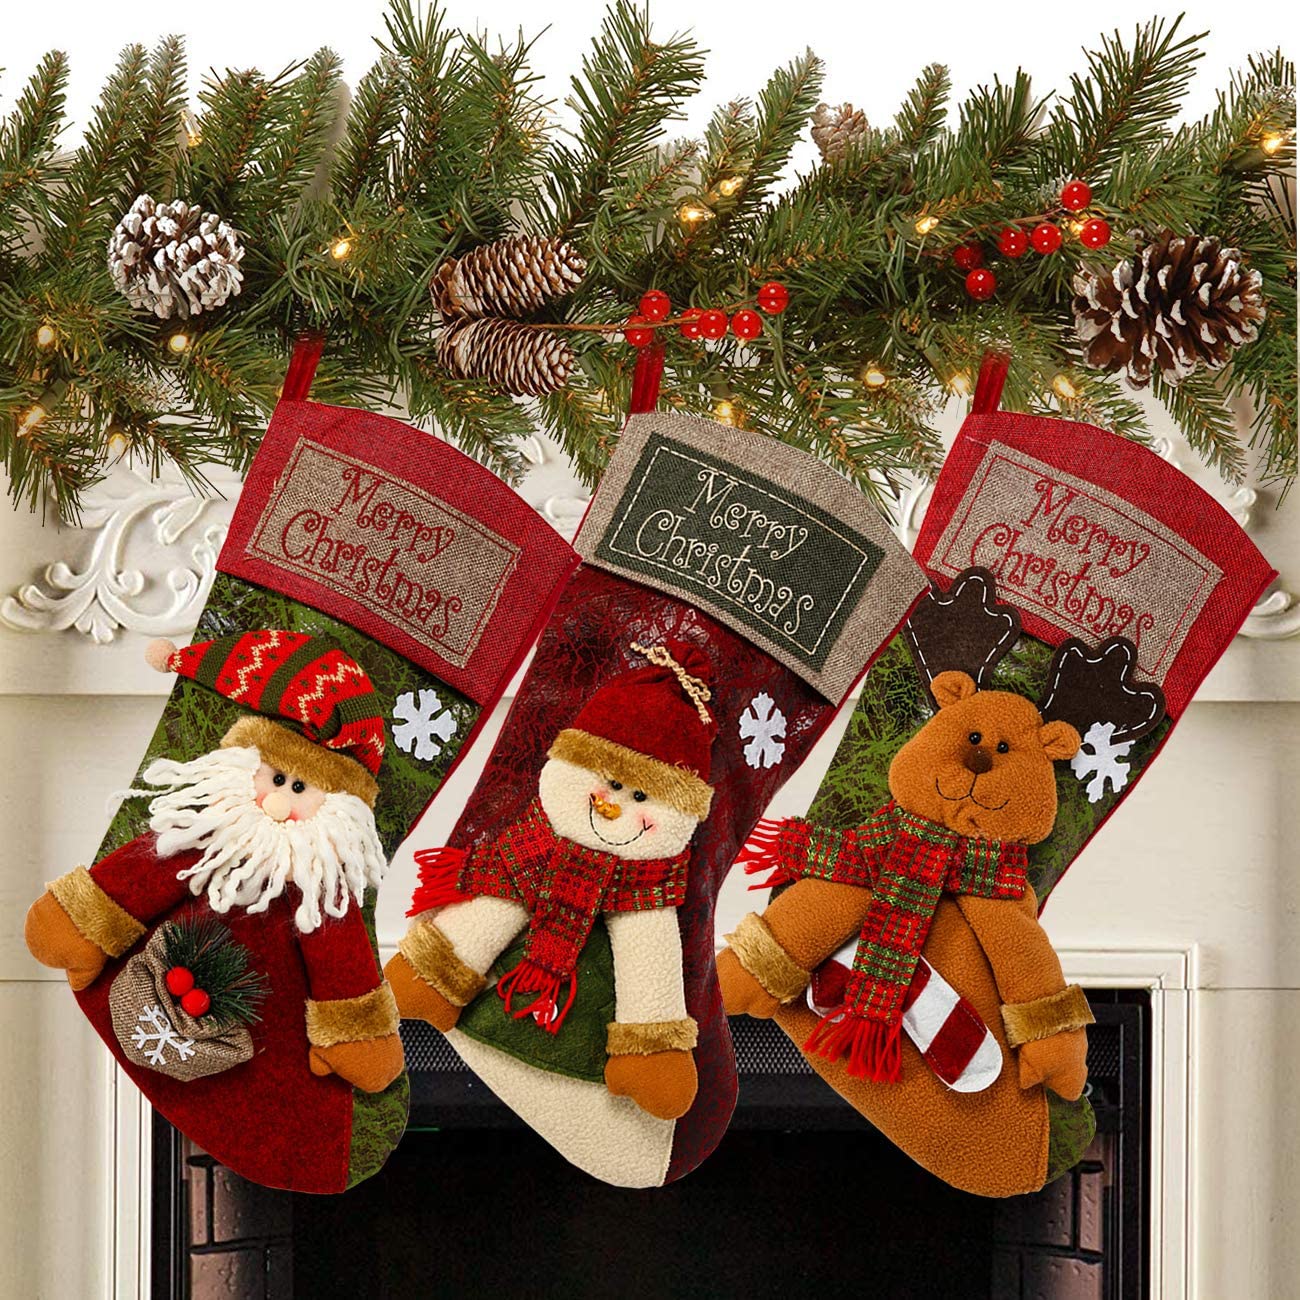 3 Needlepoint Christmas Stockings on Display on a Fireplace mantle